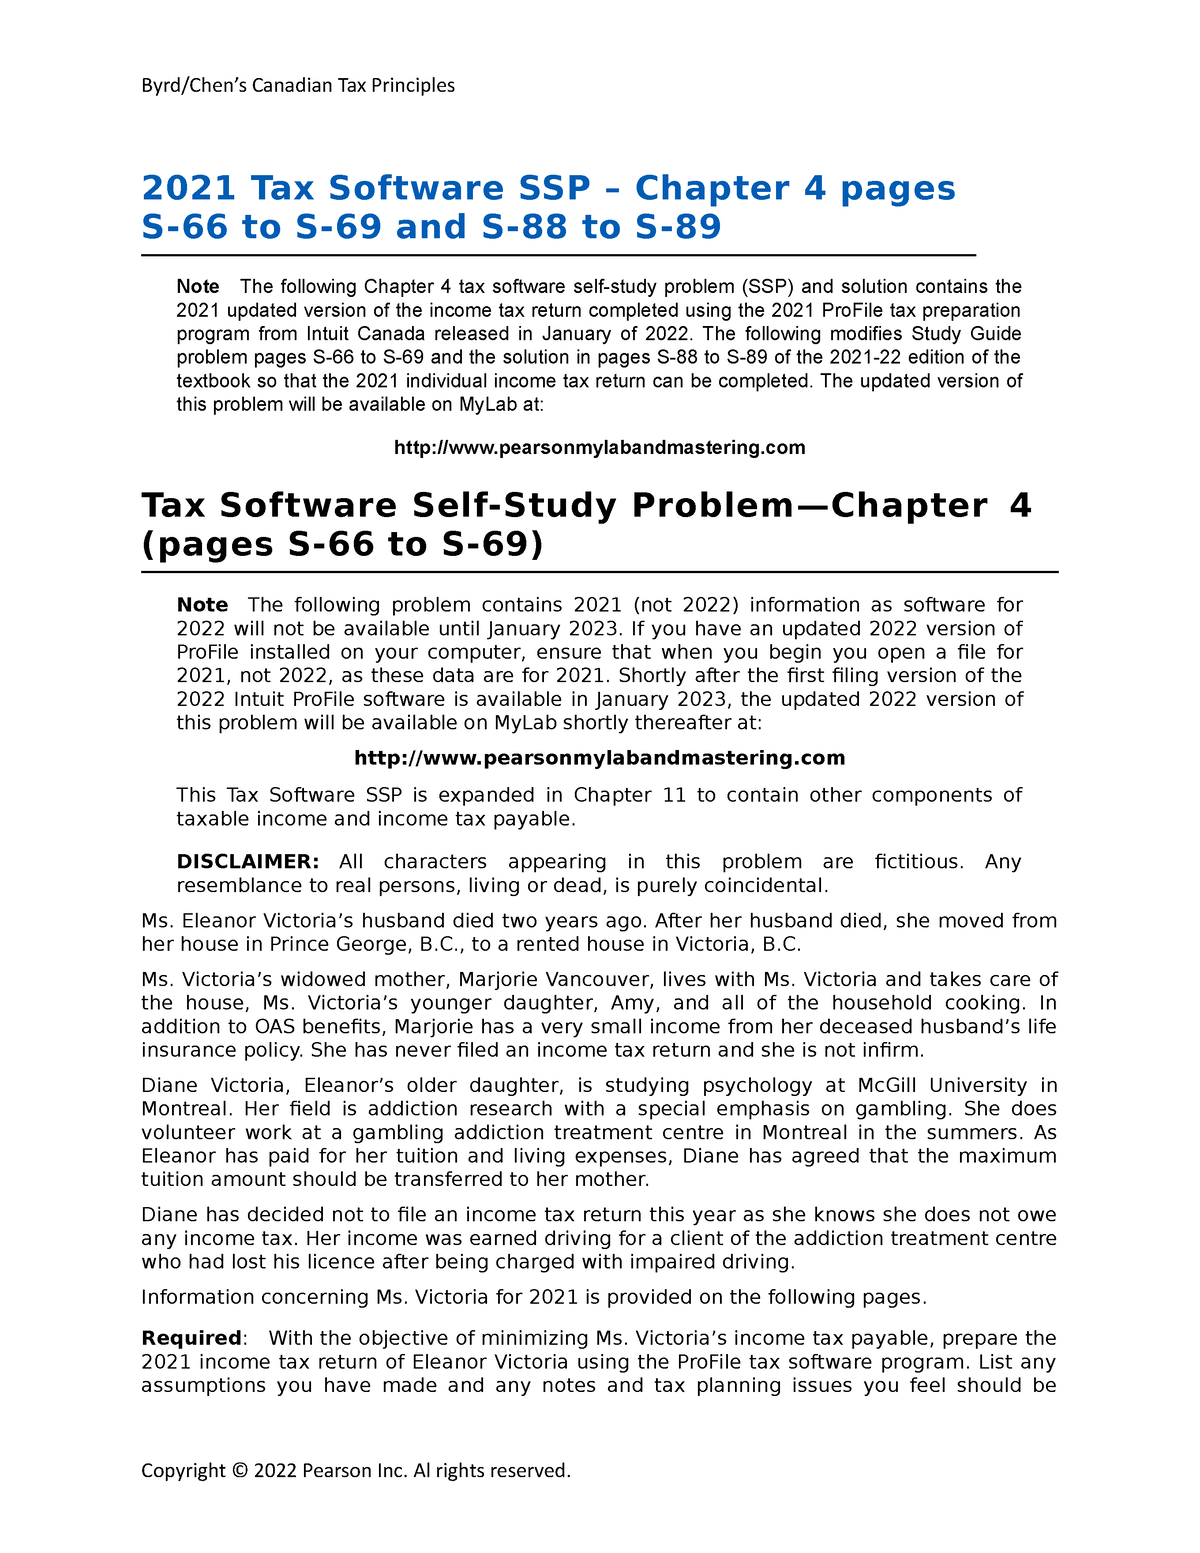 2021-tax-software-ssp-and-solution-chapter-4-2021-tax-software-ssp